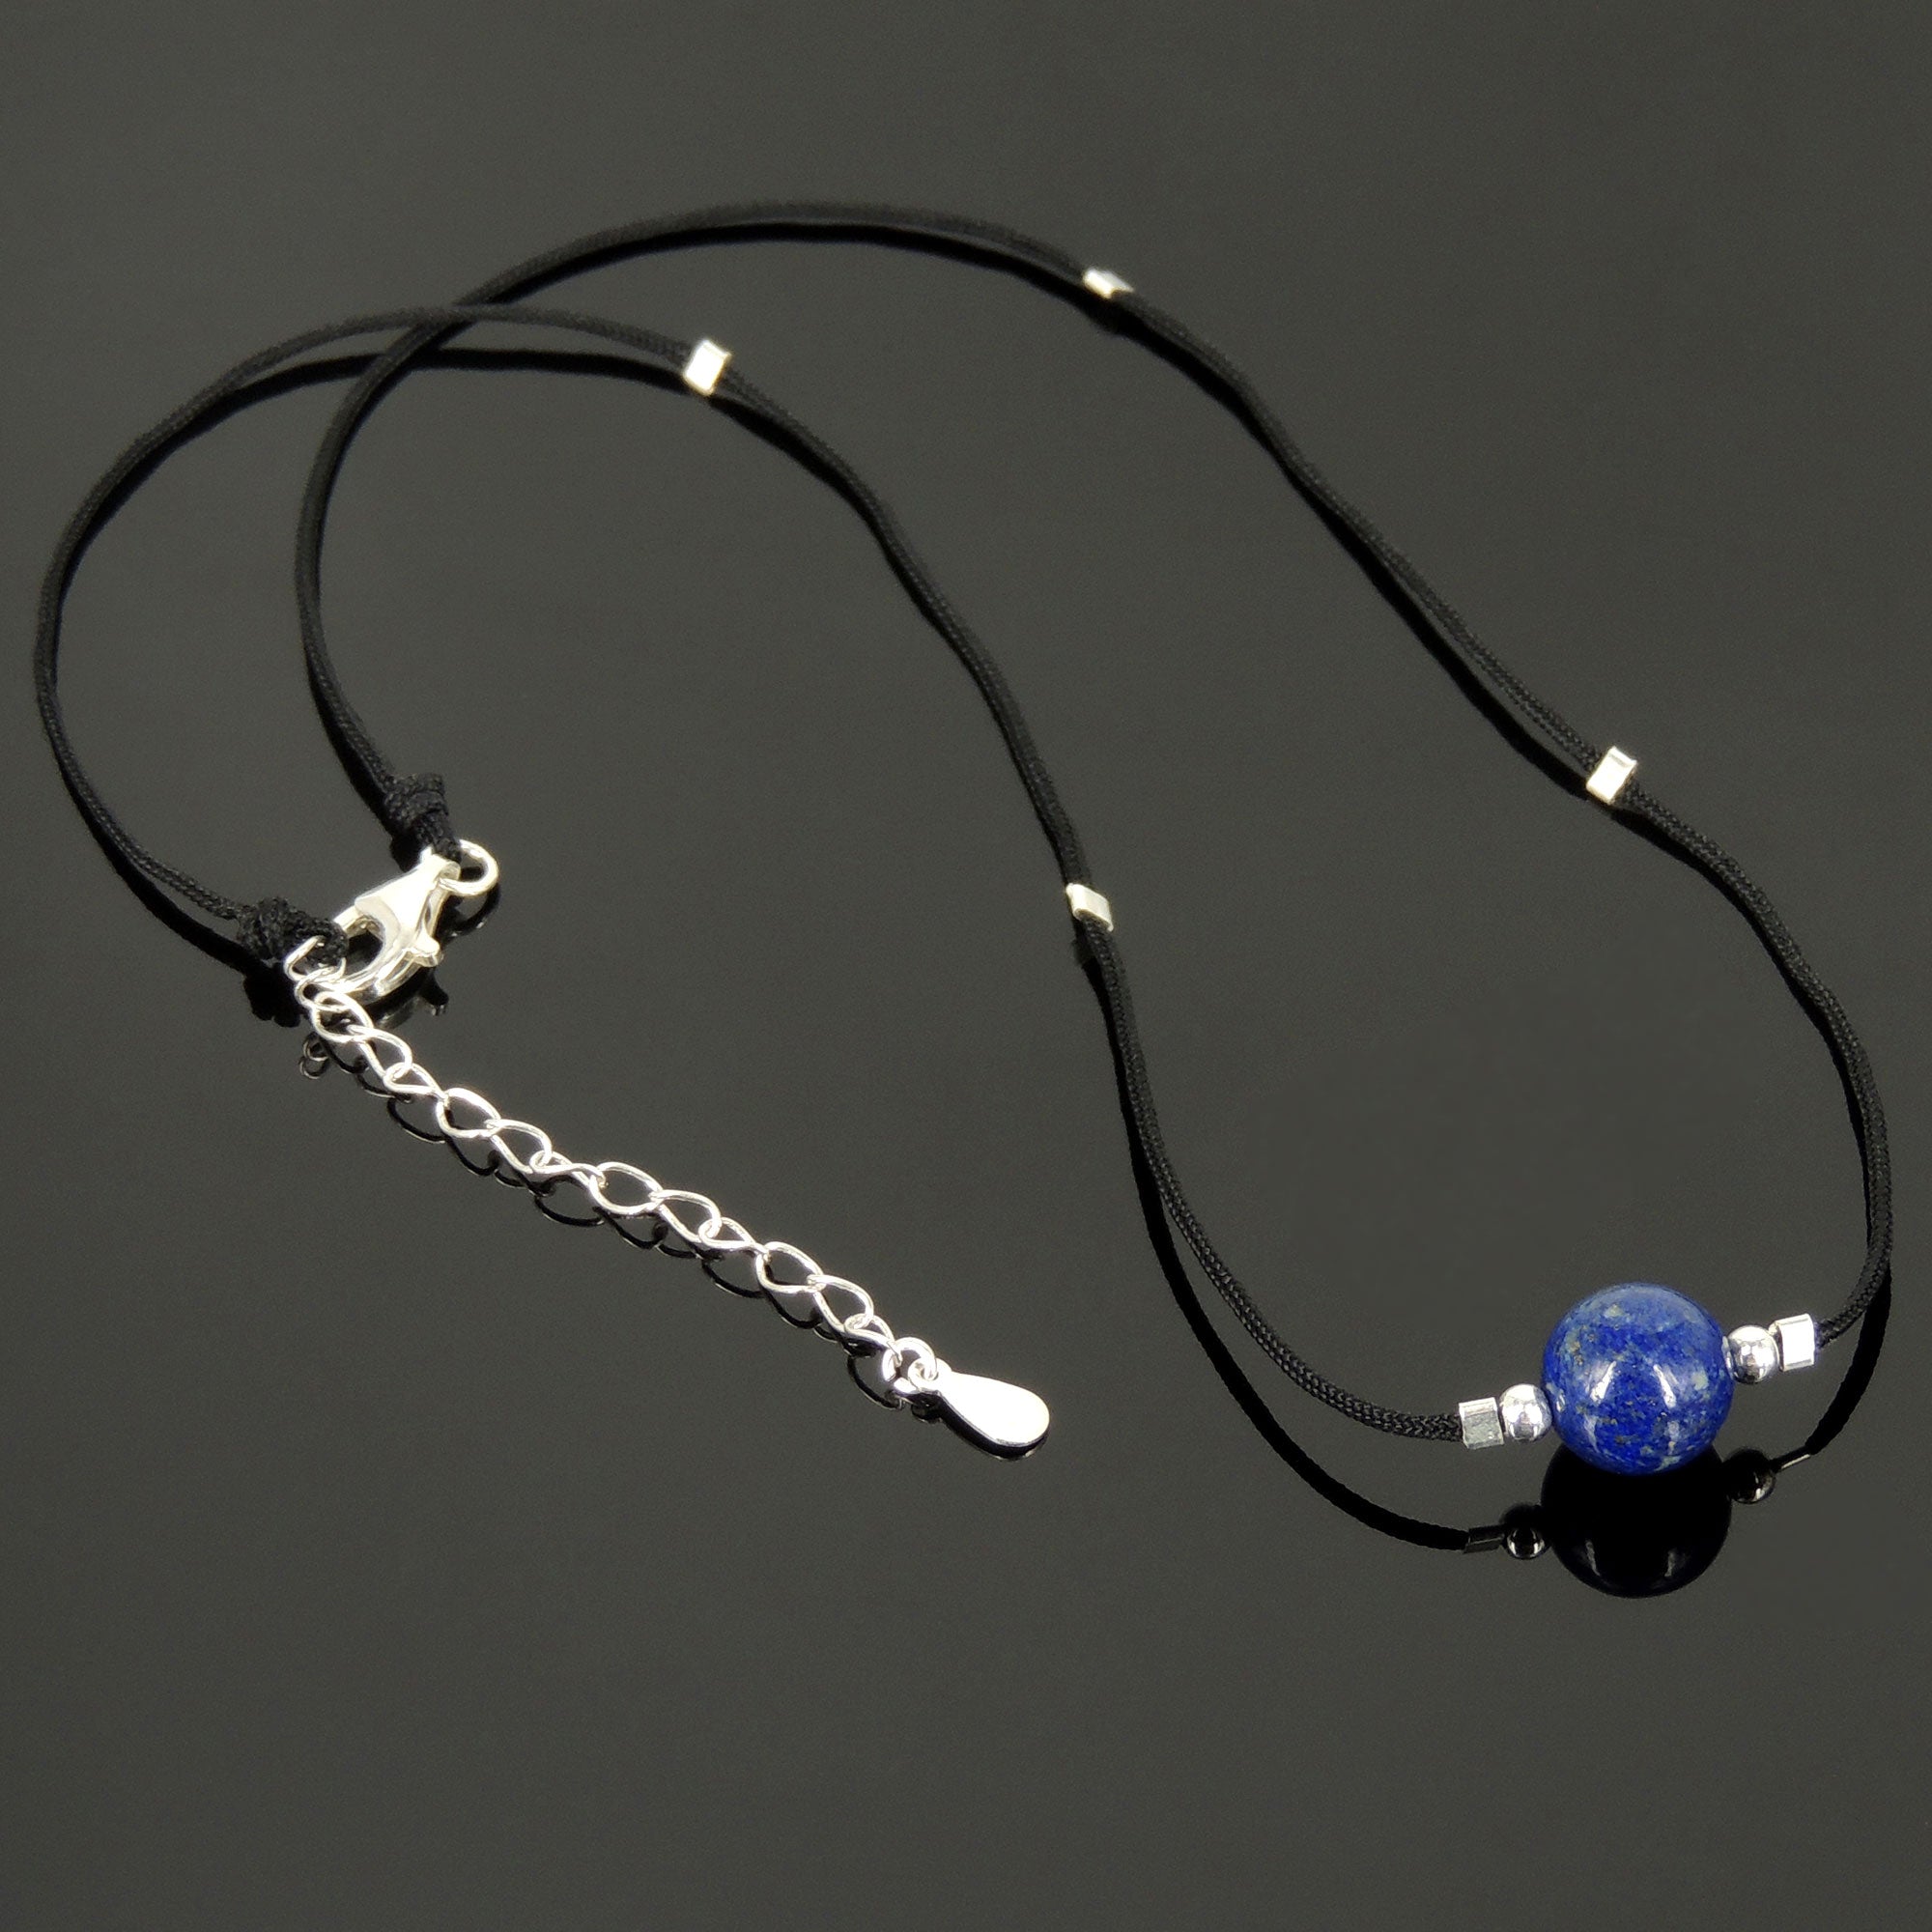 Genuine Lapis Lazuli Gemstone Bead Pendant | Handmade Adjustable Necklace with 925 Silver Parts | Intuitively Chosen to Open Ajna Mind Center | Third Eye Chakra Activation